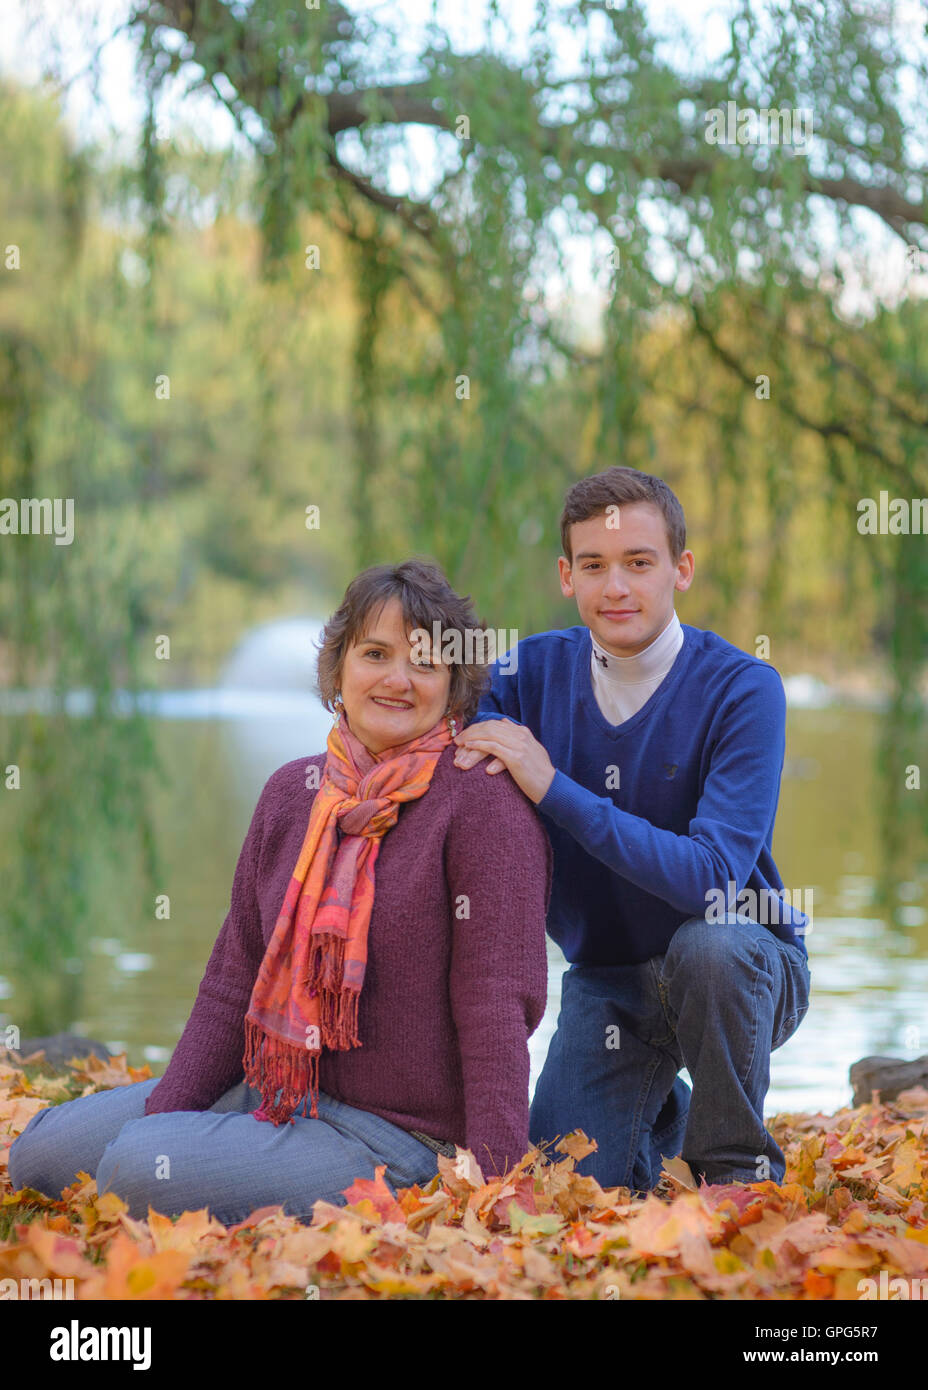 Mother and son in a park setting Stock Photo